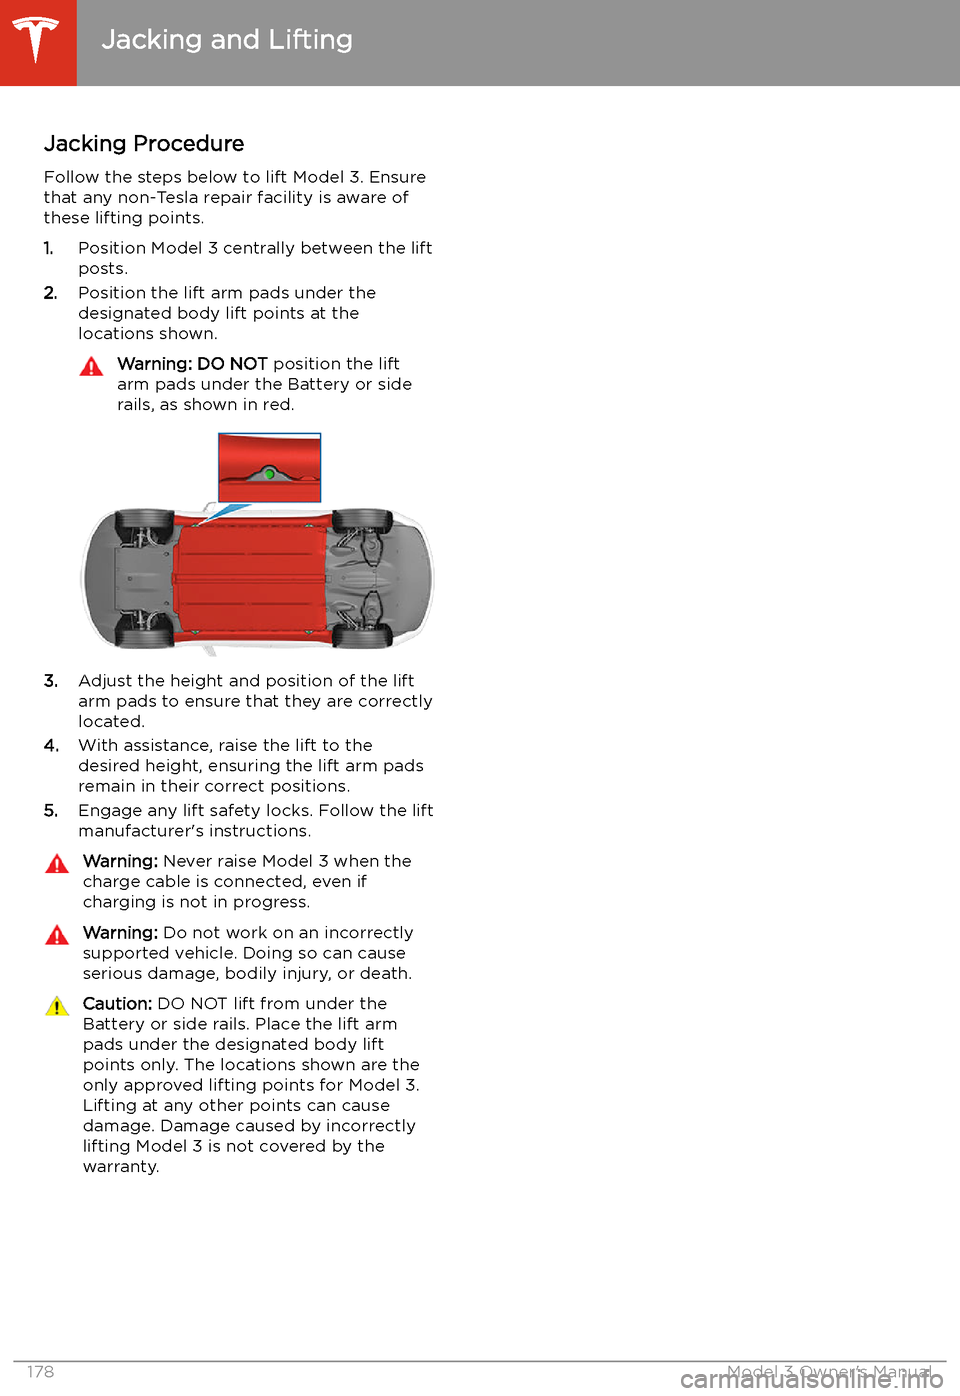 TESLA MODEL 3 2020  s Service Manual Jacking and Lifting
Jacking Procedure
Follow the steps below to lift Model 3. Ensure
that any non-Tesla repair facility is aware of
these lifting points.
1. Position Model 3 centrally between the lift